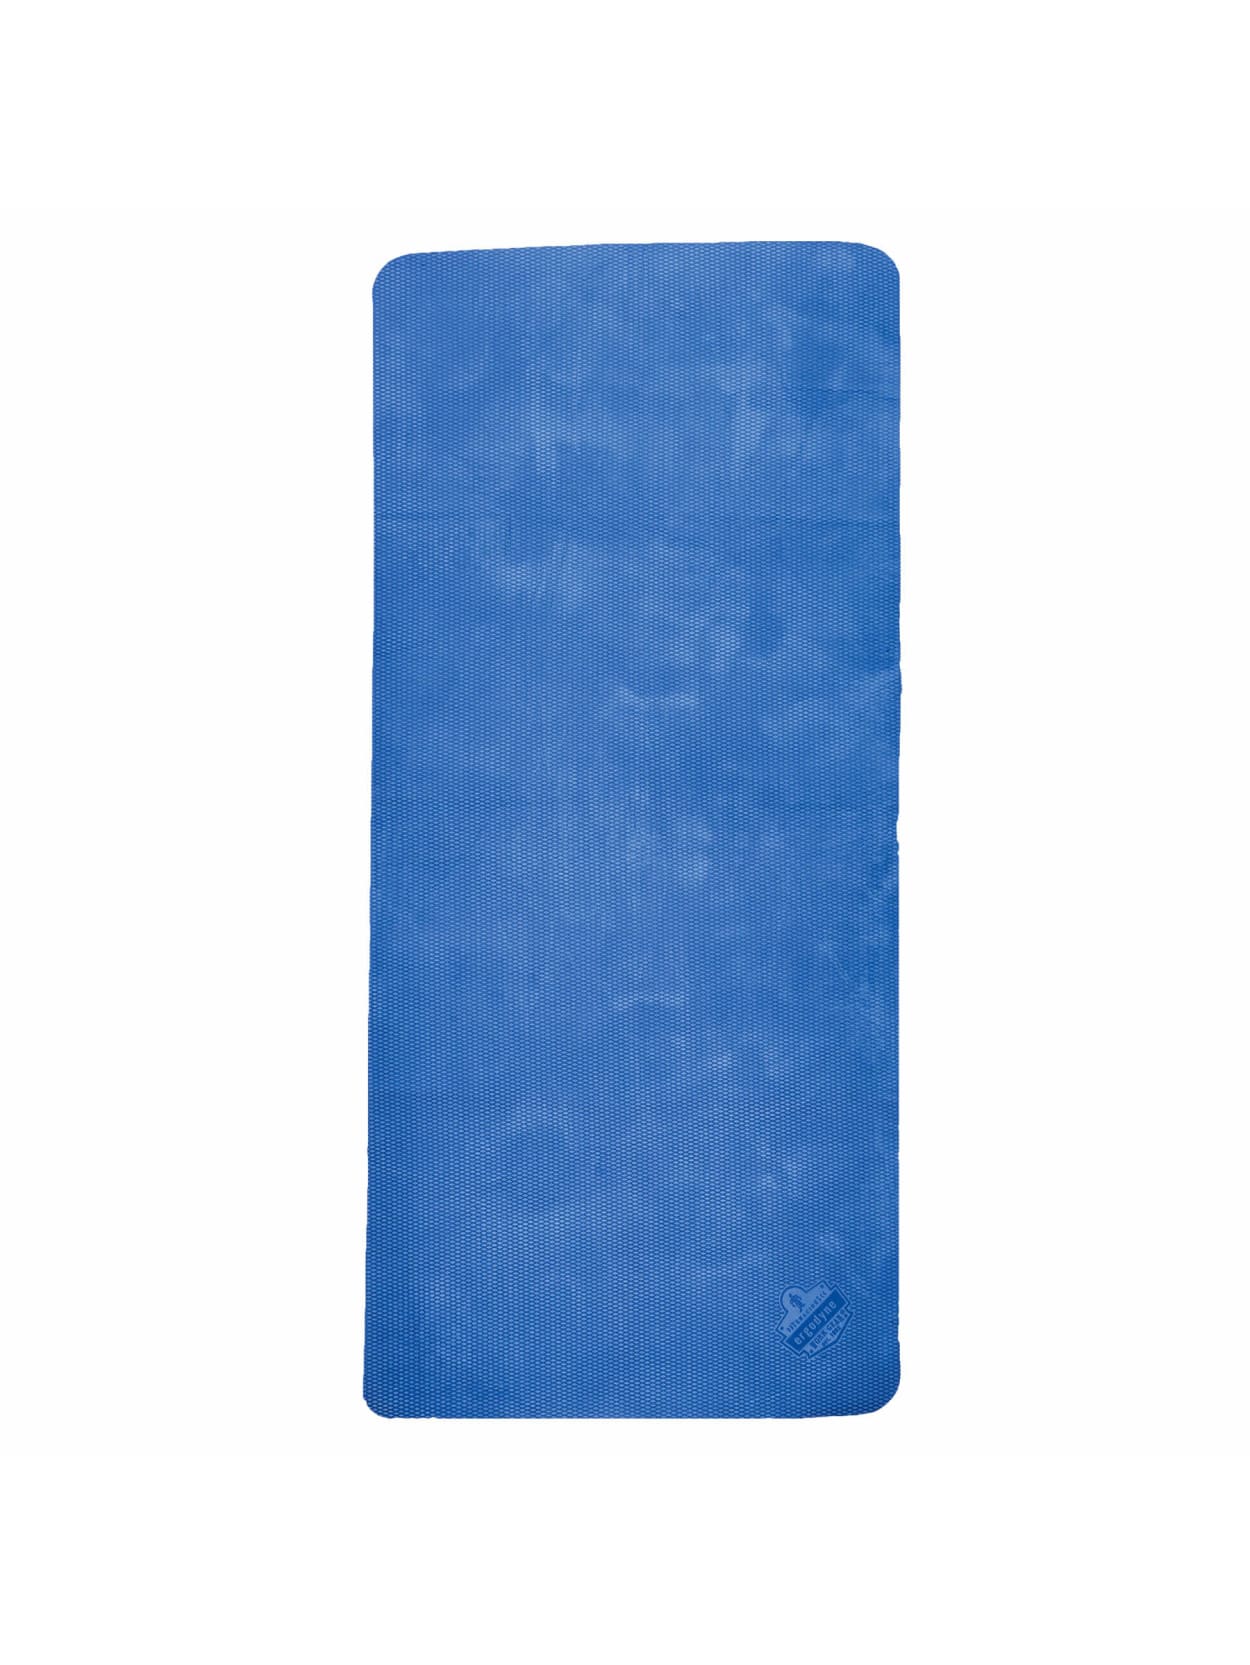 chill cooling towel